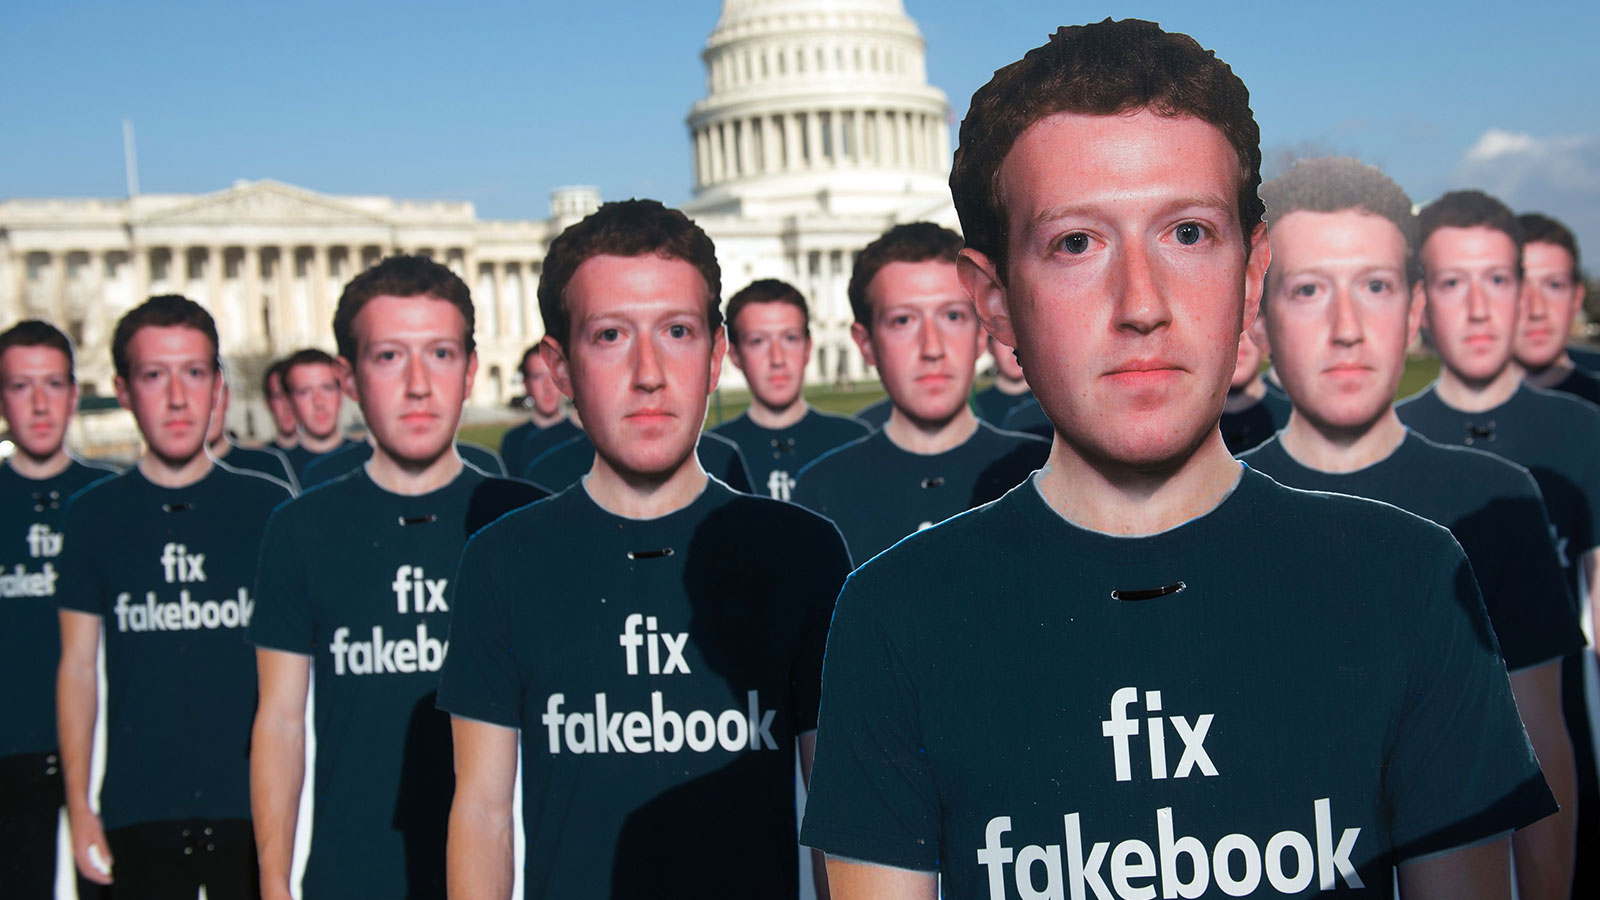 One hundred cardboard cutouts of Facebook founder and CEO Mark Zuckerberg stand outside the US Capitol